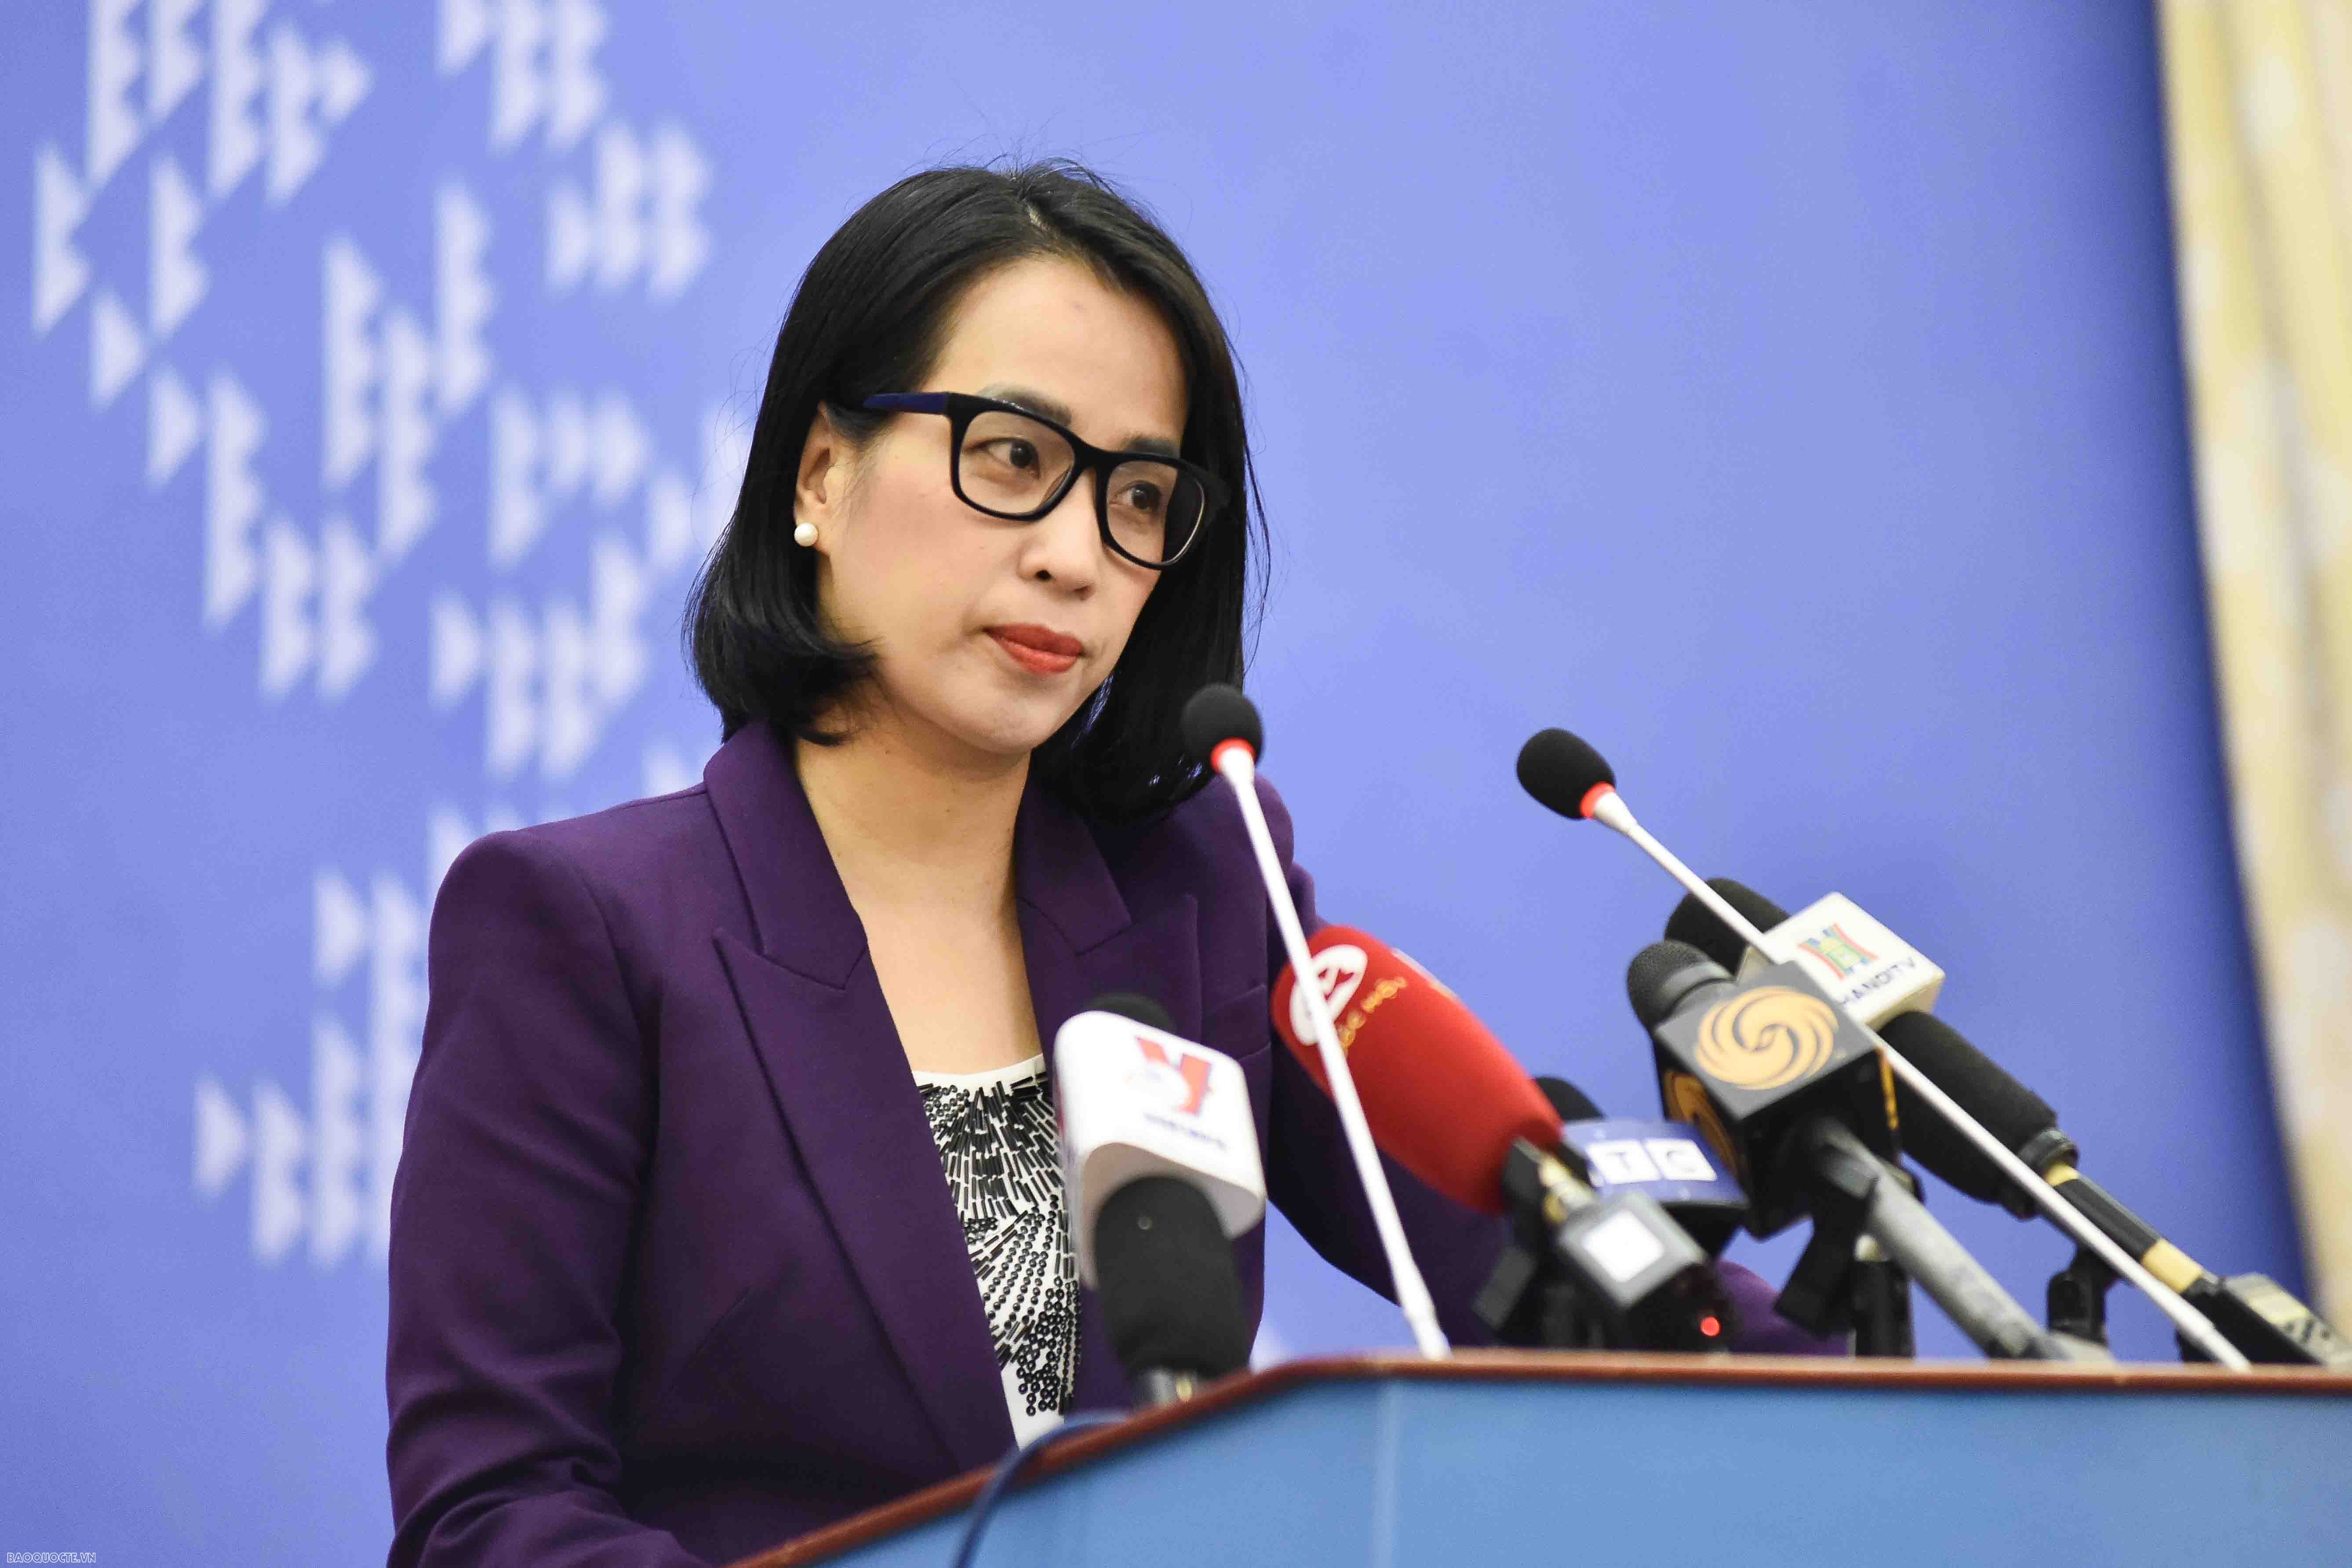 Vietnam urges exclusion from US religious freedom watch list: Spokesperson